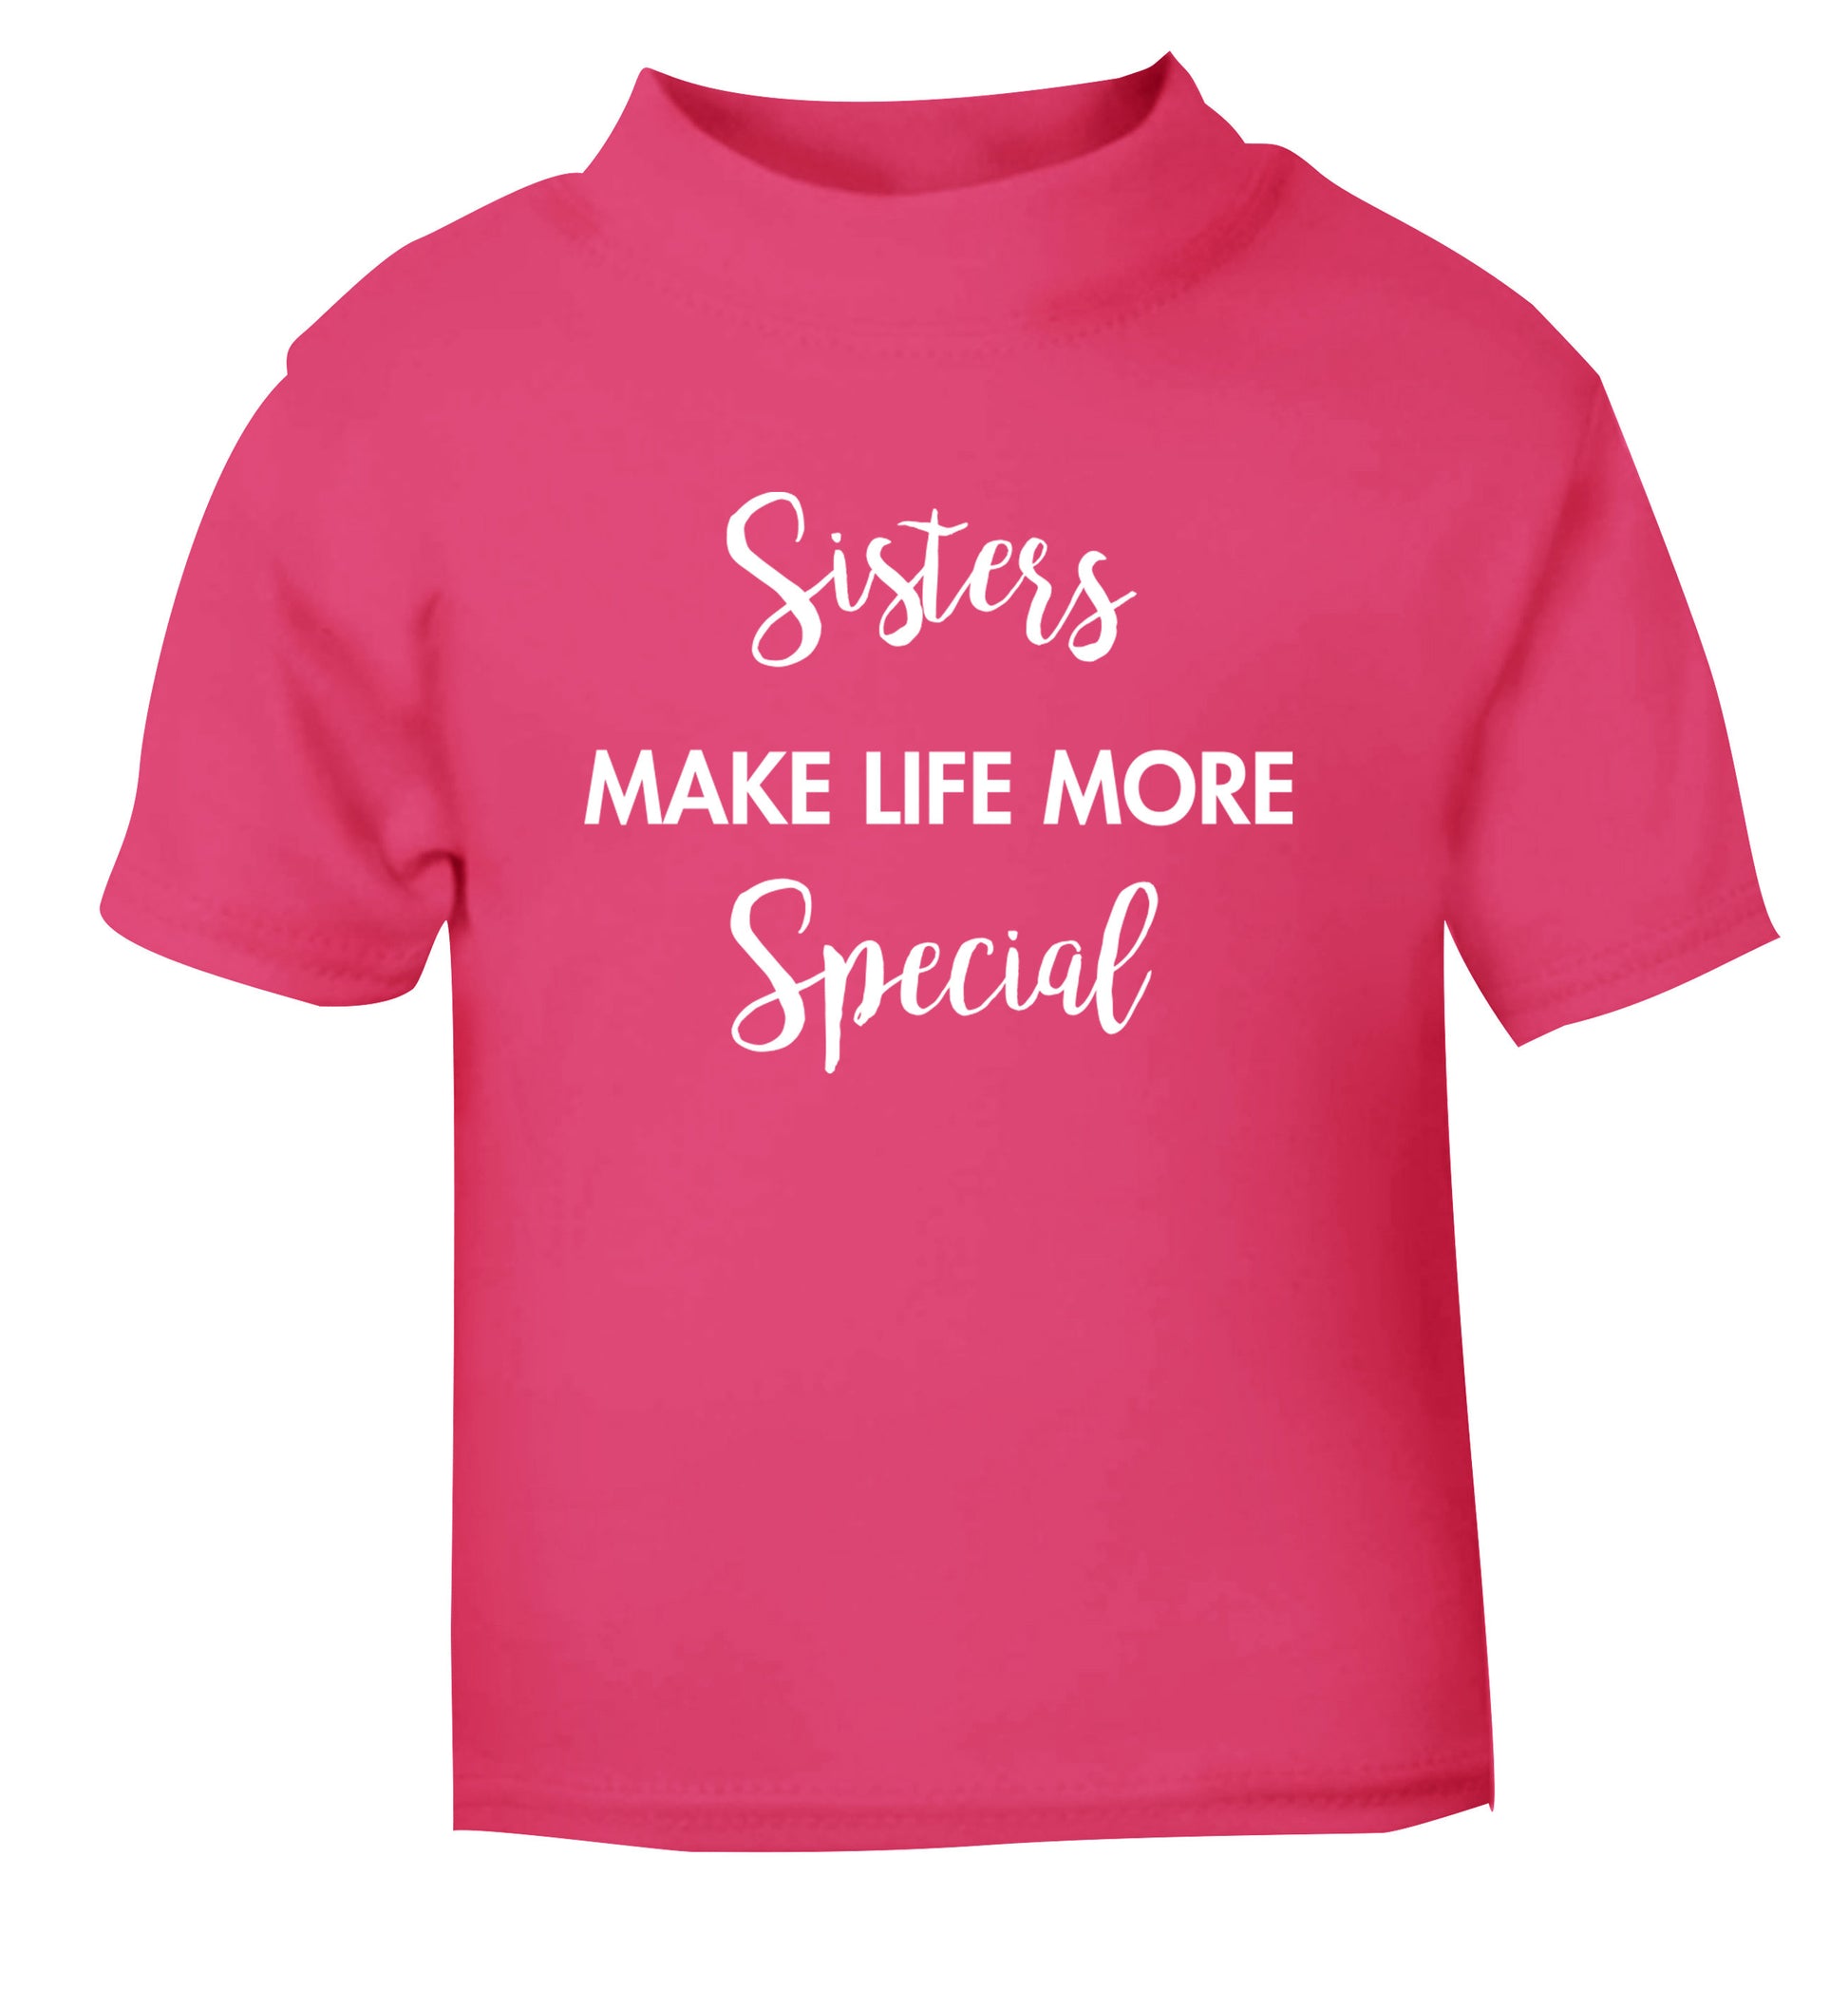 Sisters make life more special pink Baby Toddler Tshirt 2 Years